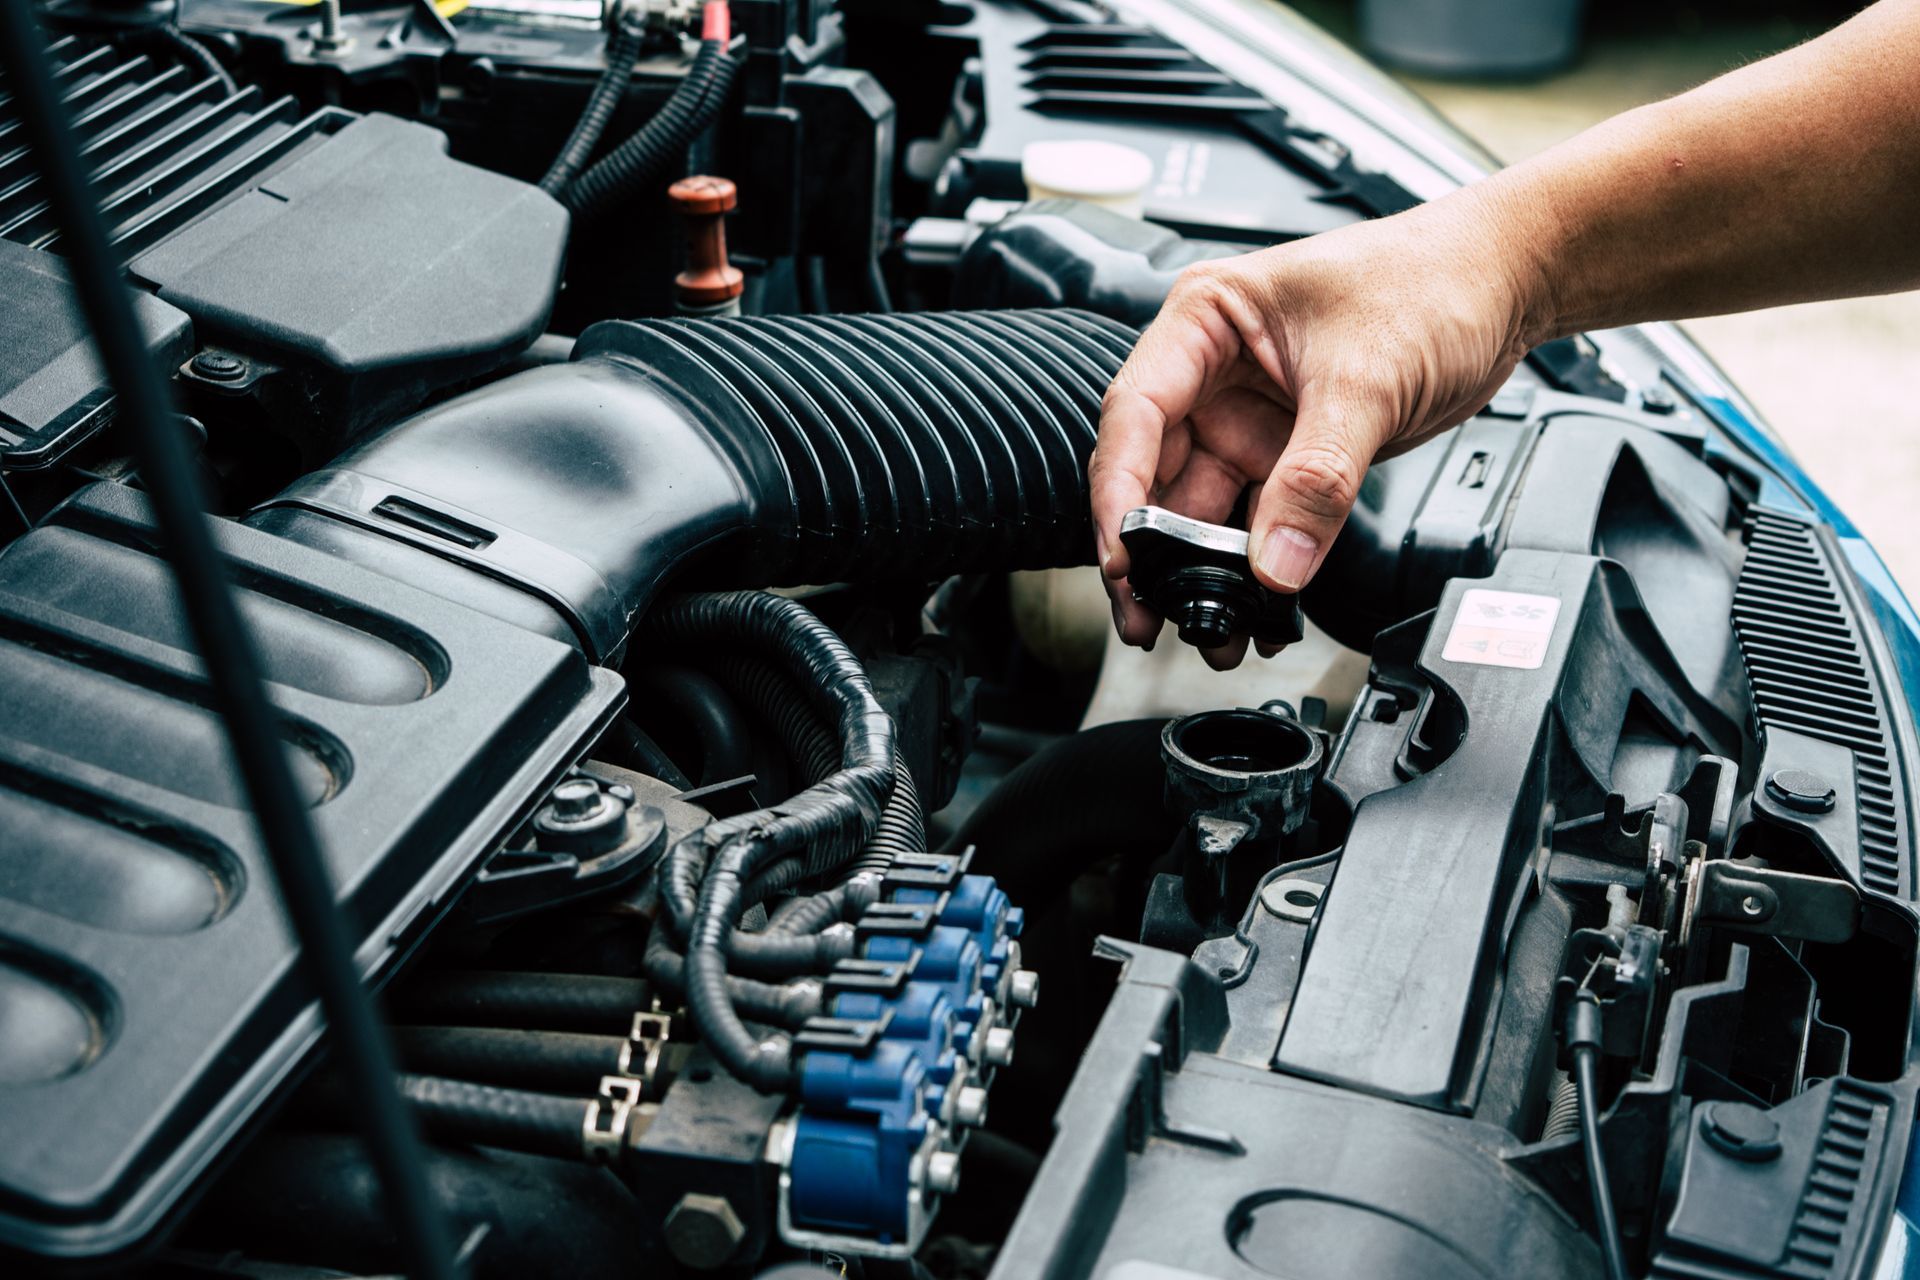 A person is holding a radiator cap under the hood of a car.